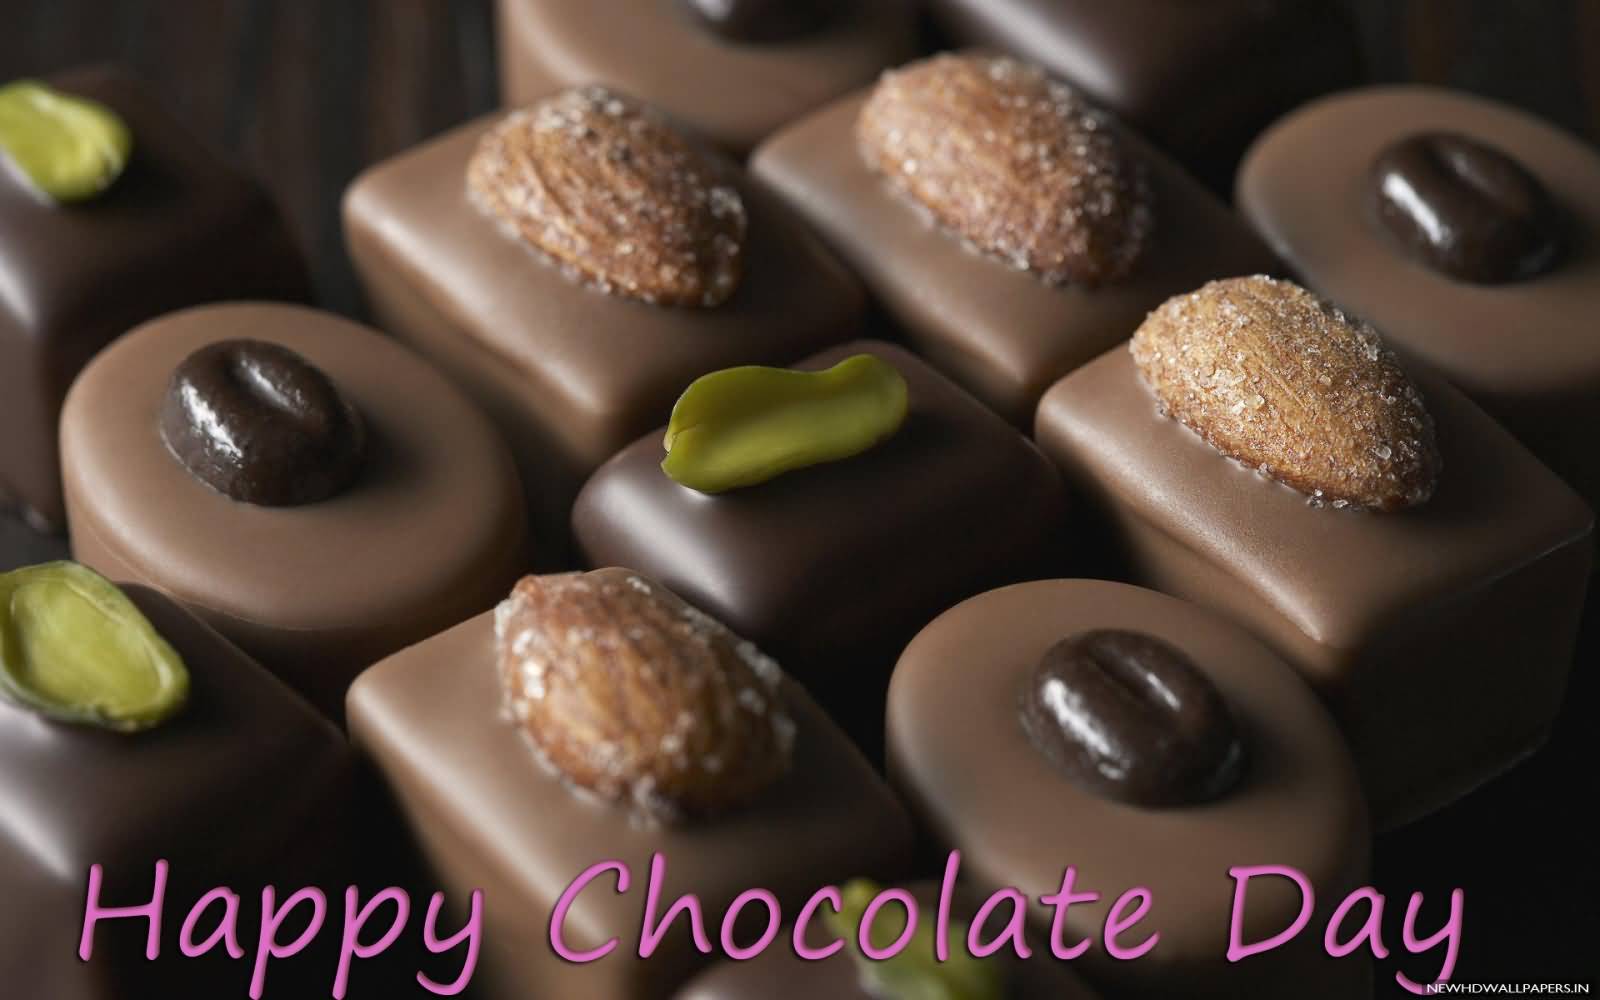 Happy Chocolate Day Chocolates With Nuts For You